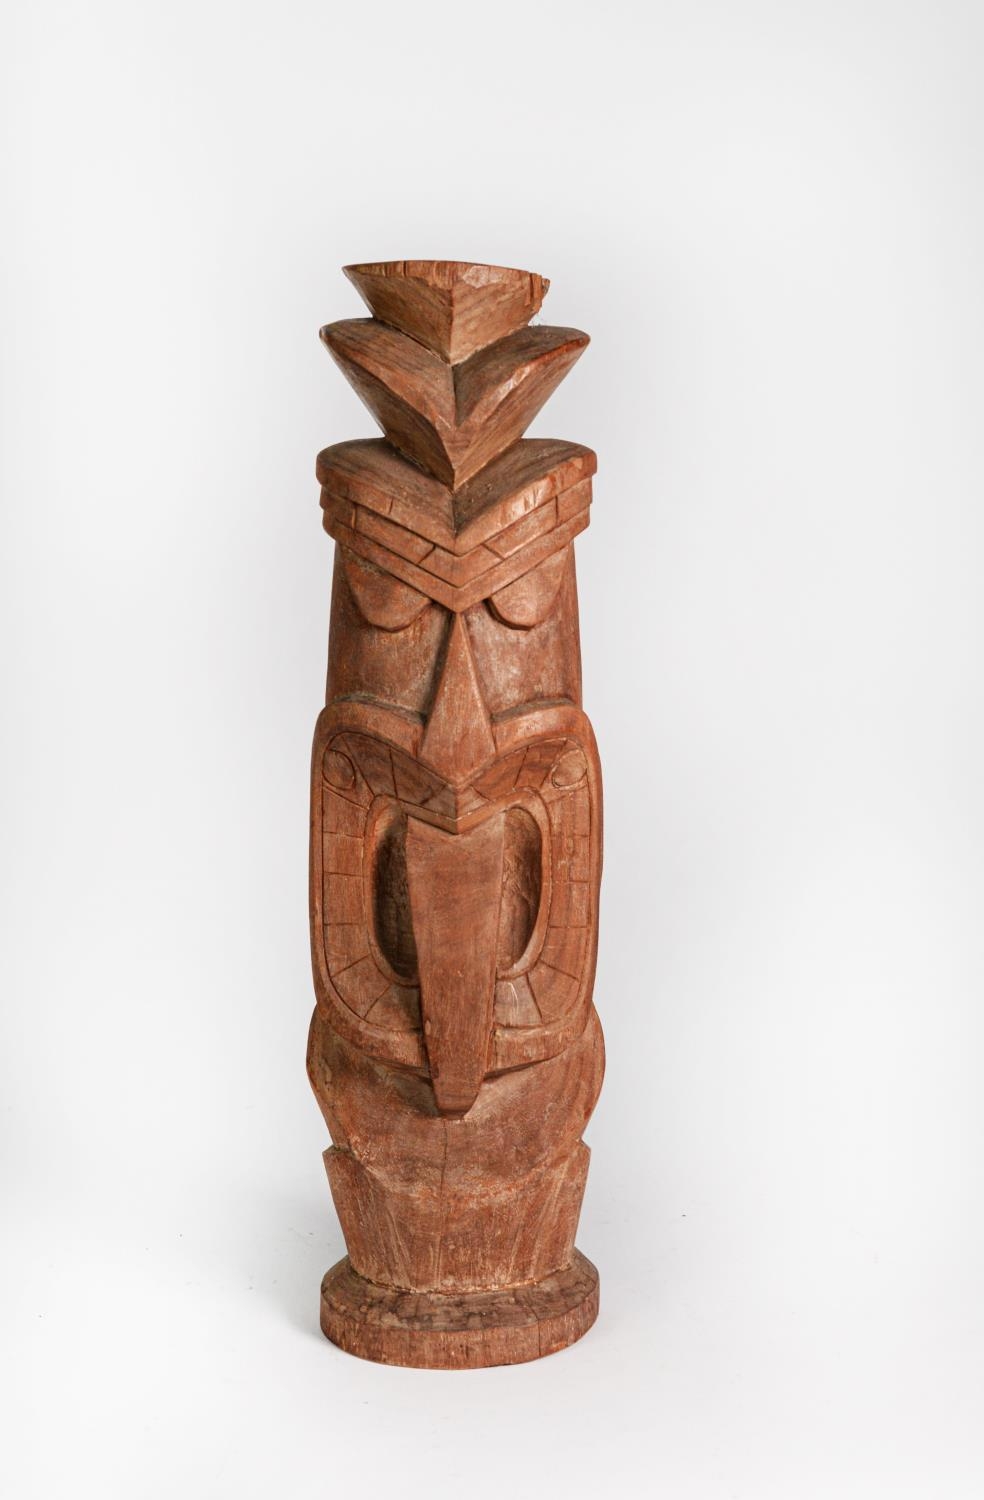 FIJIAN CARVED SOFTWOOD TOTEM, 18 3/4in (47.5cm) high